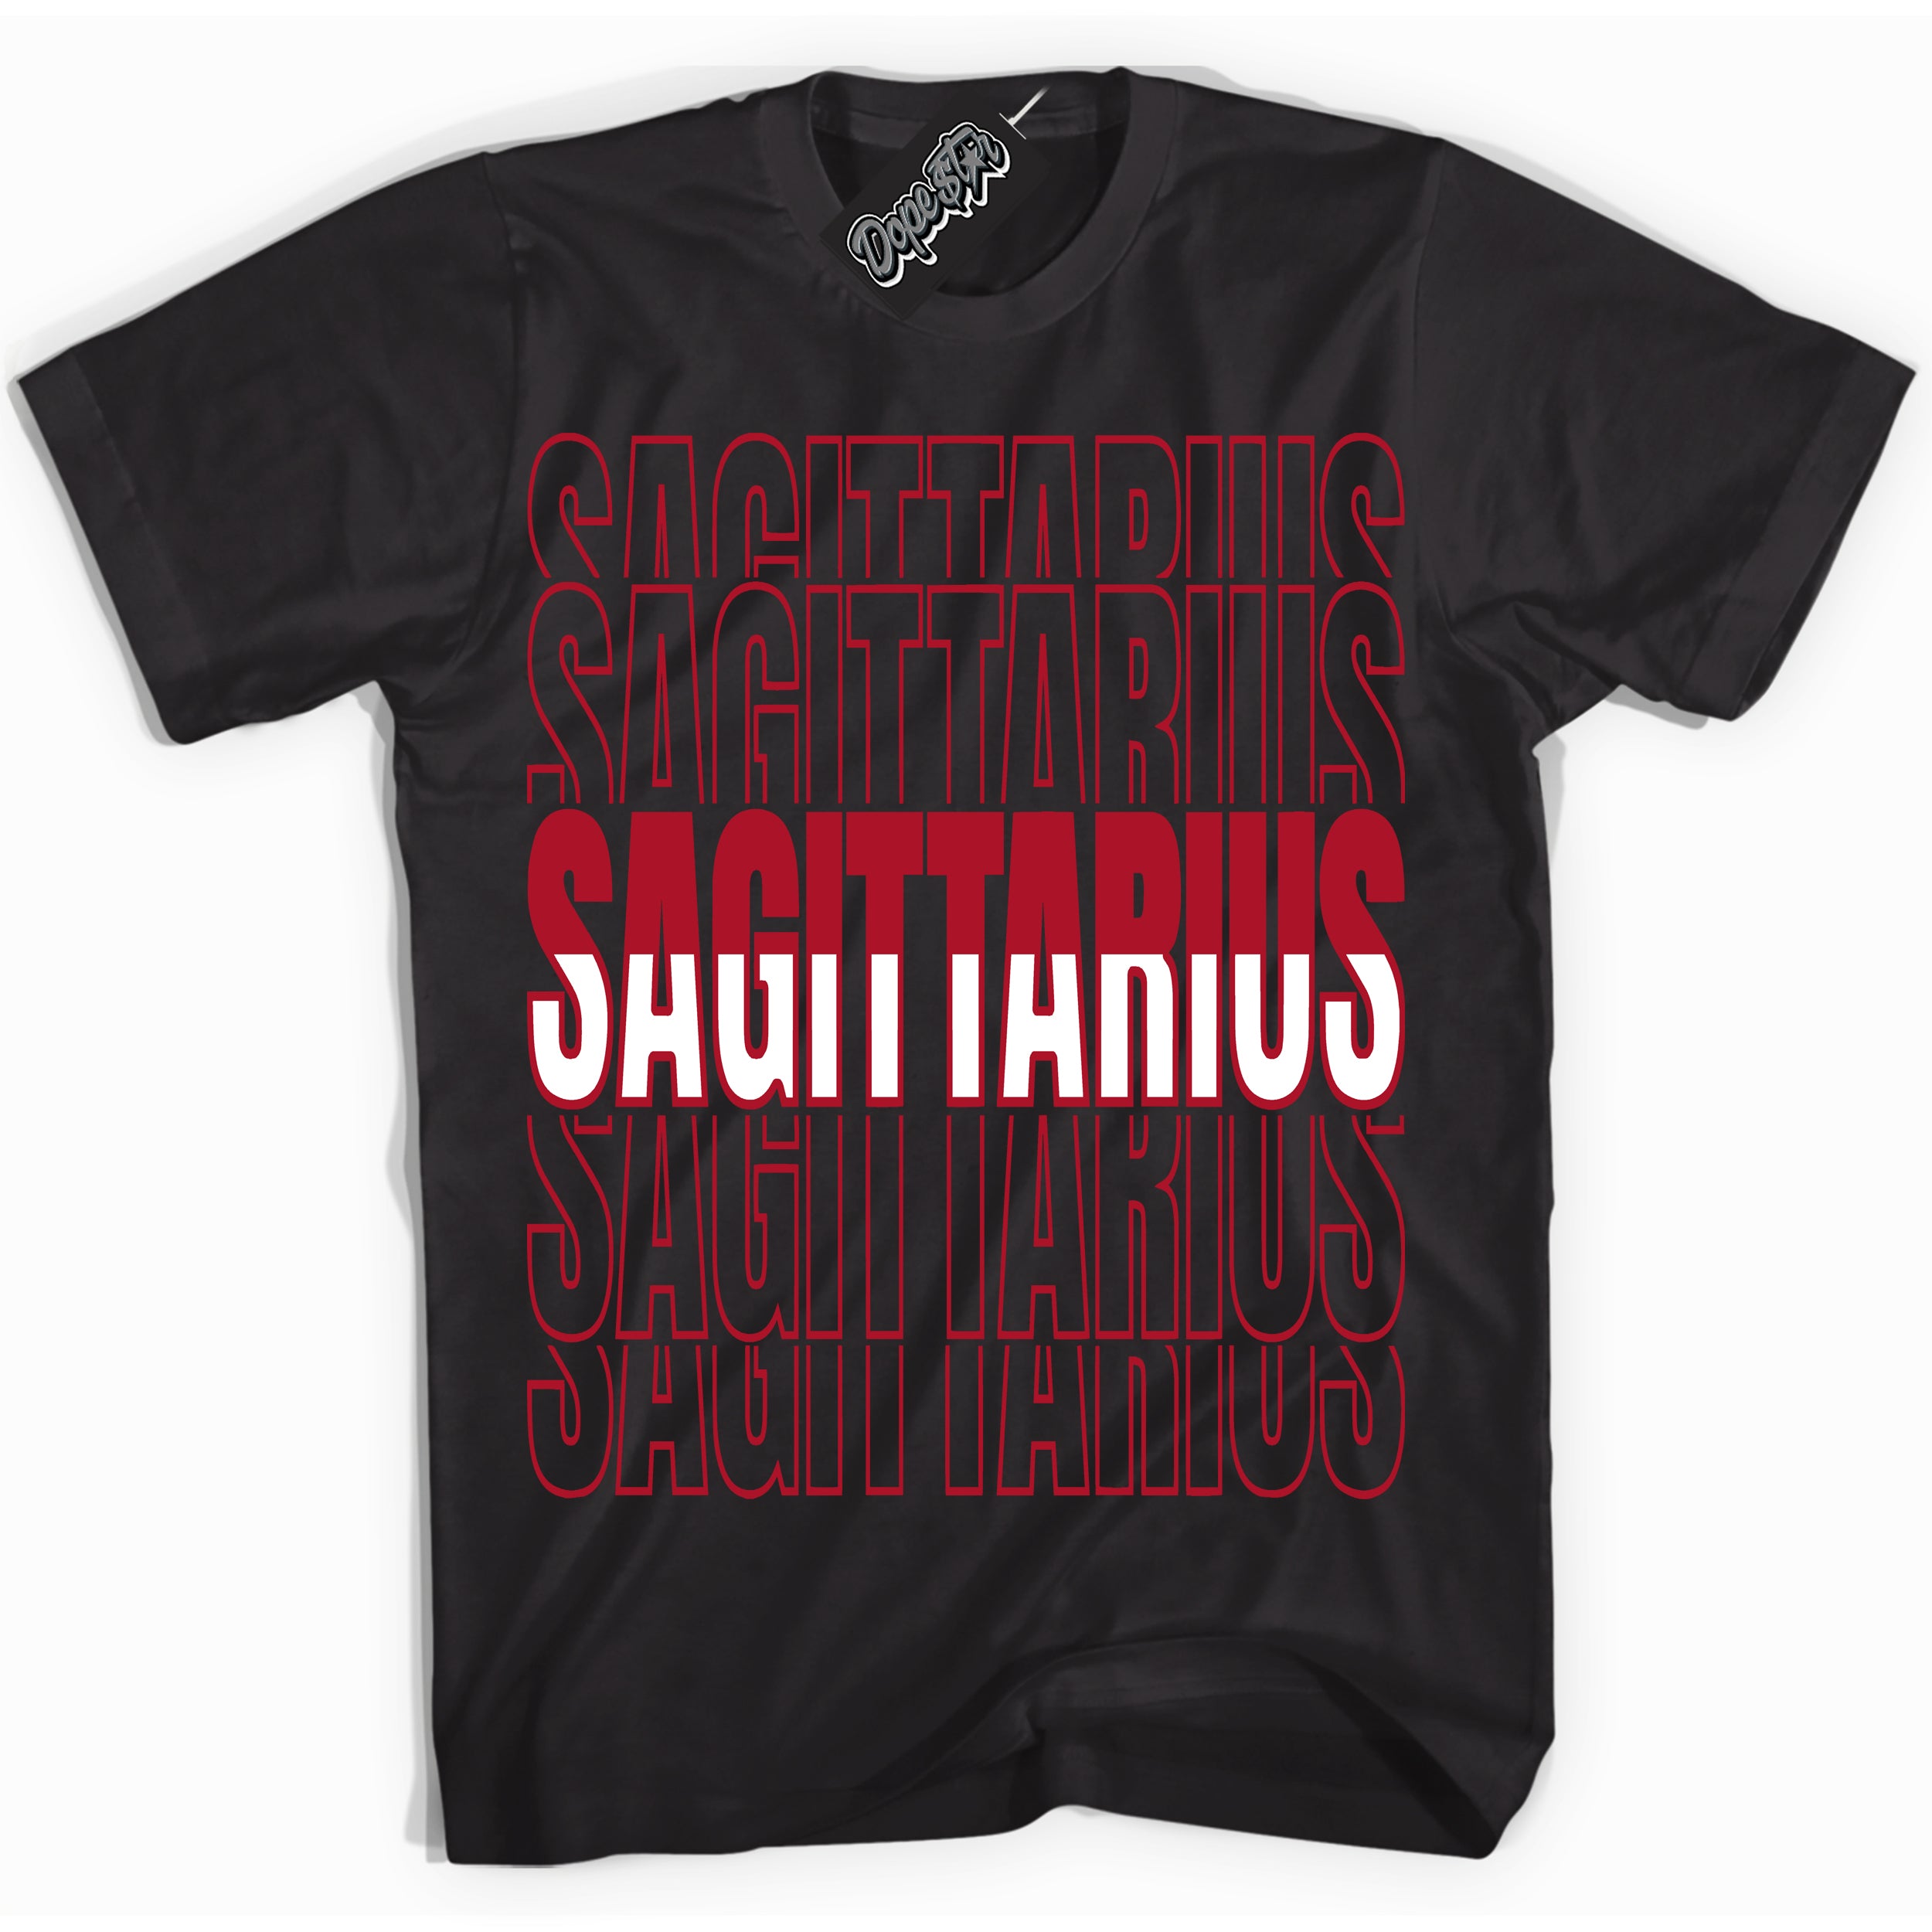 Cool Black Shirt with “ Sagittarius ” design that perfectly matches Reverse Ultraman Sneakers.